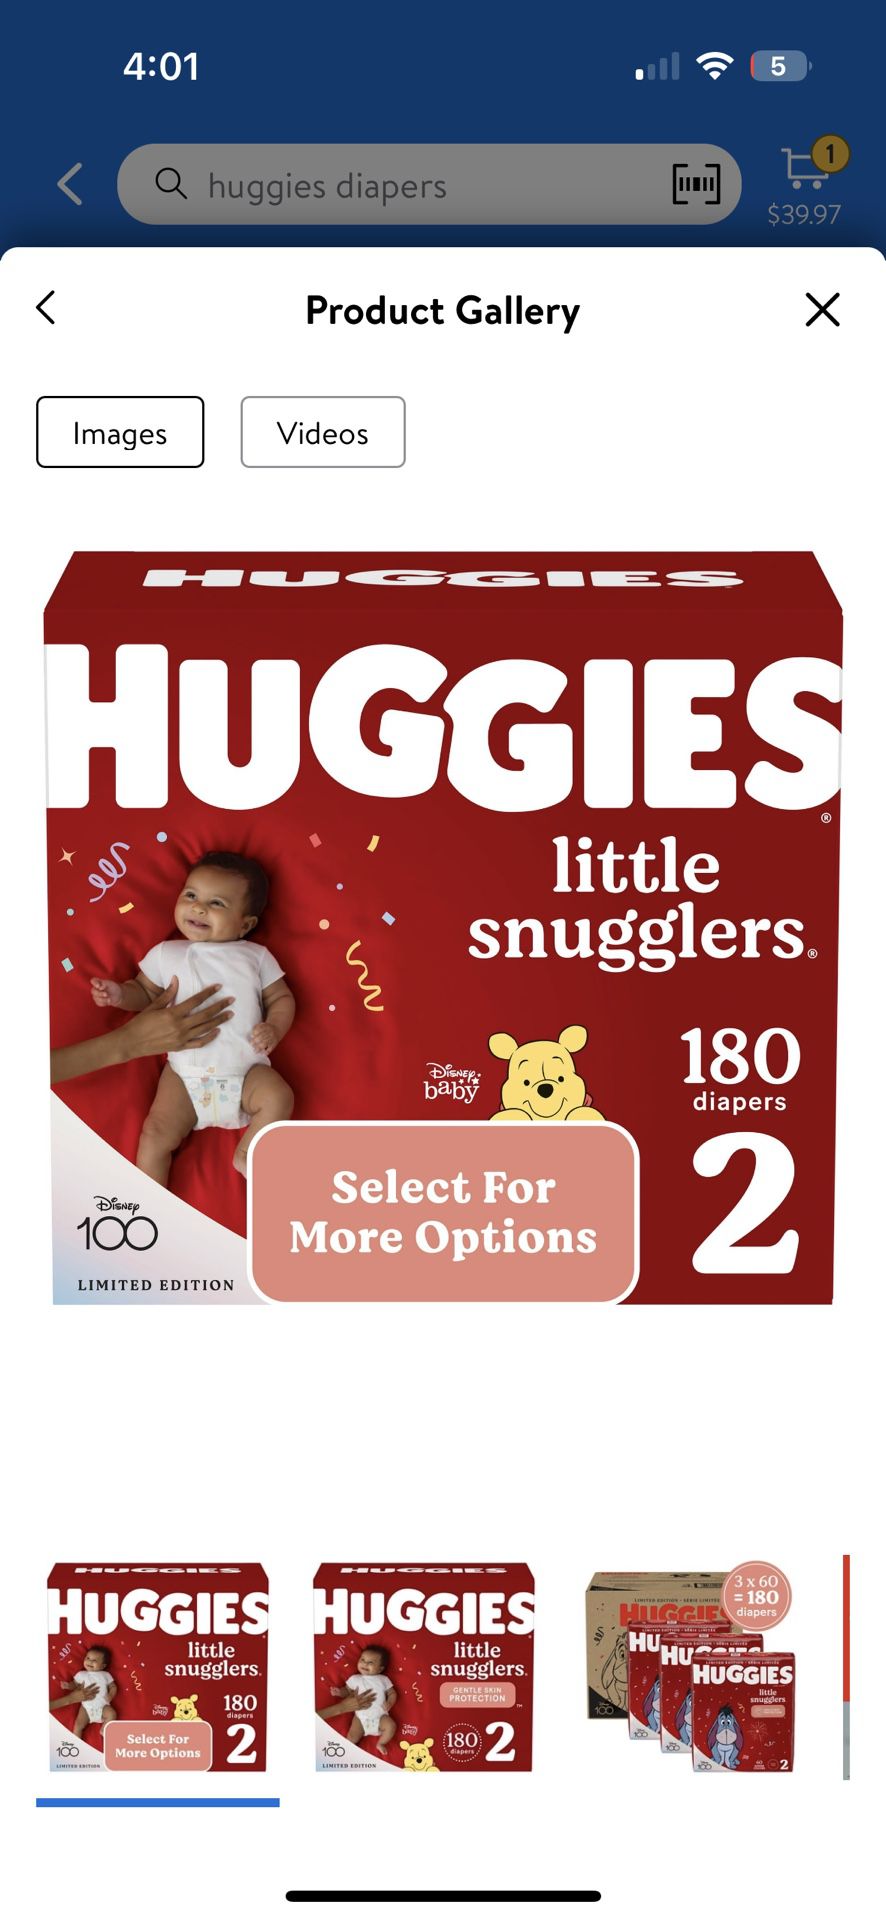 Huggies and Pampers Diapers